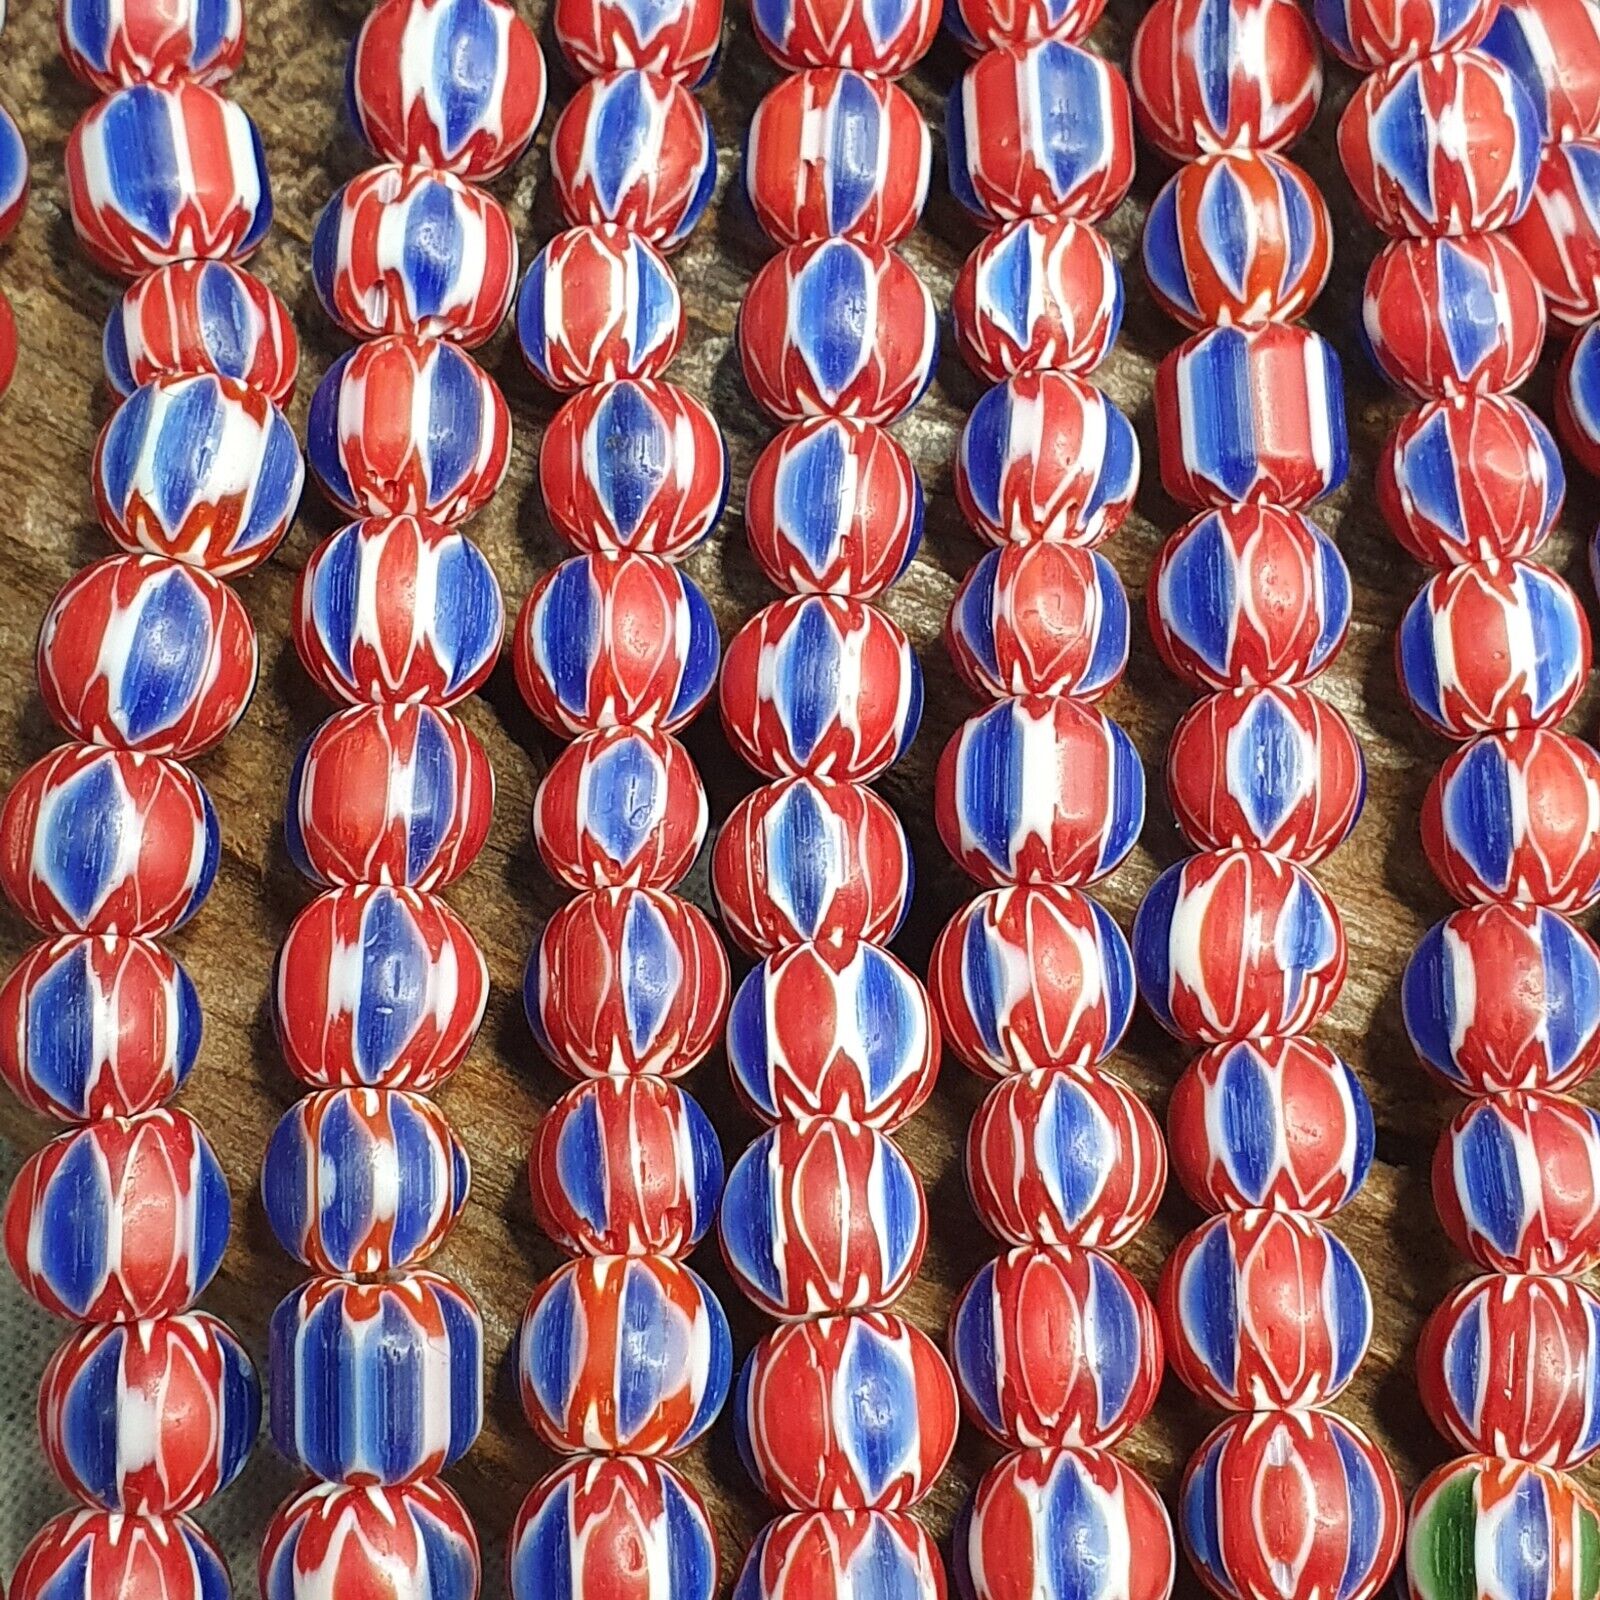 Vintage Blue Red Chevron Beads Venetian African style Beads 8mm